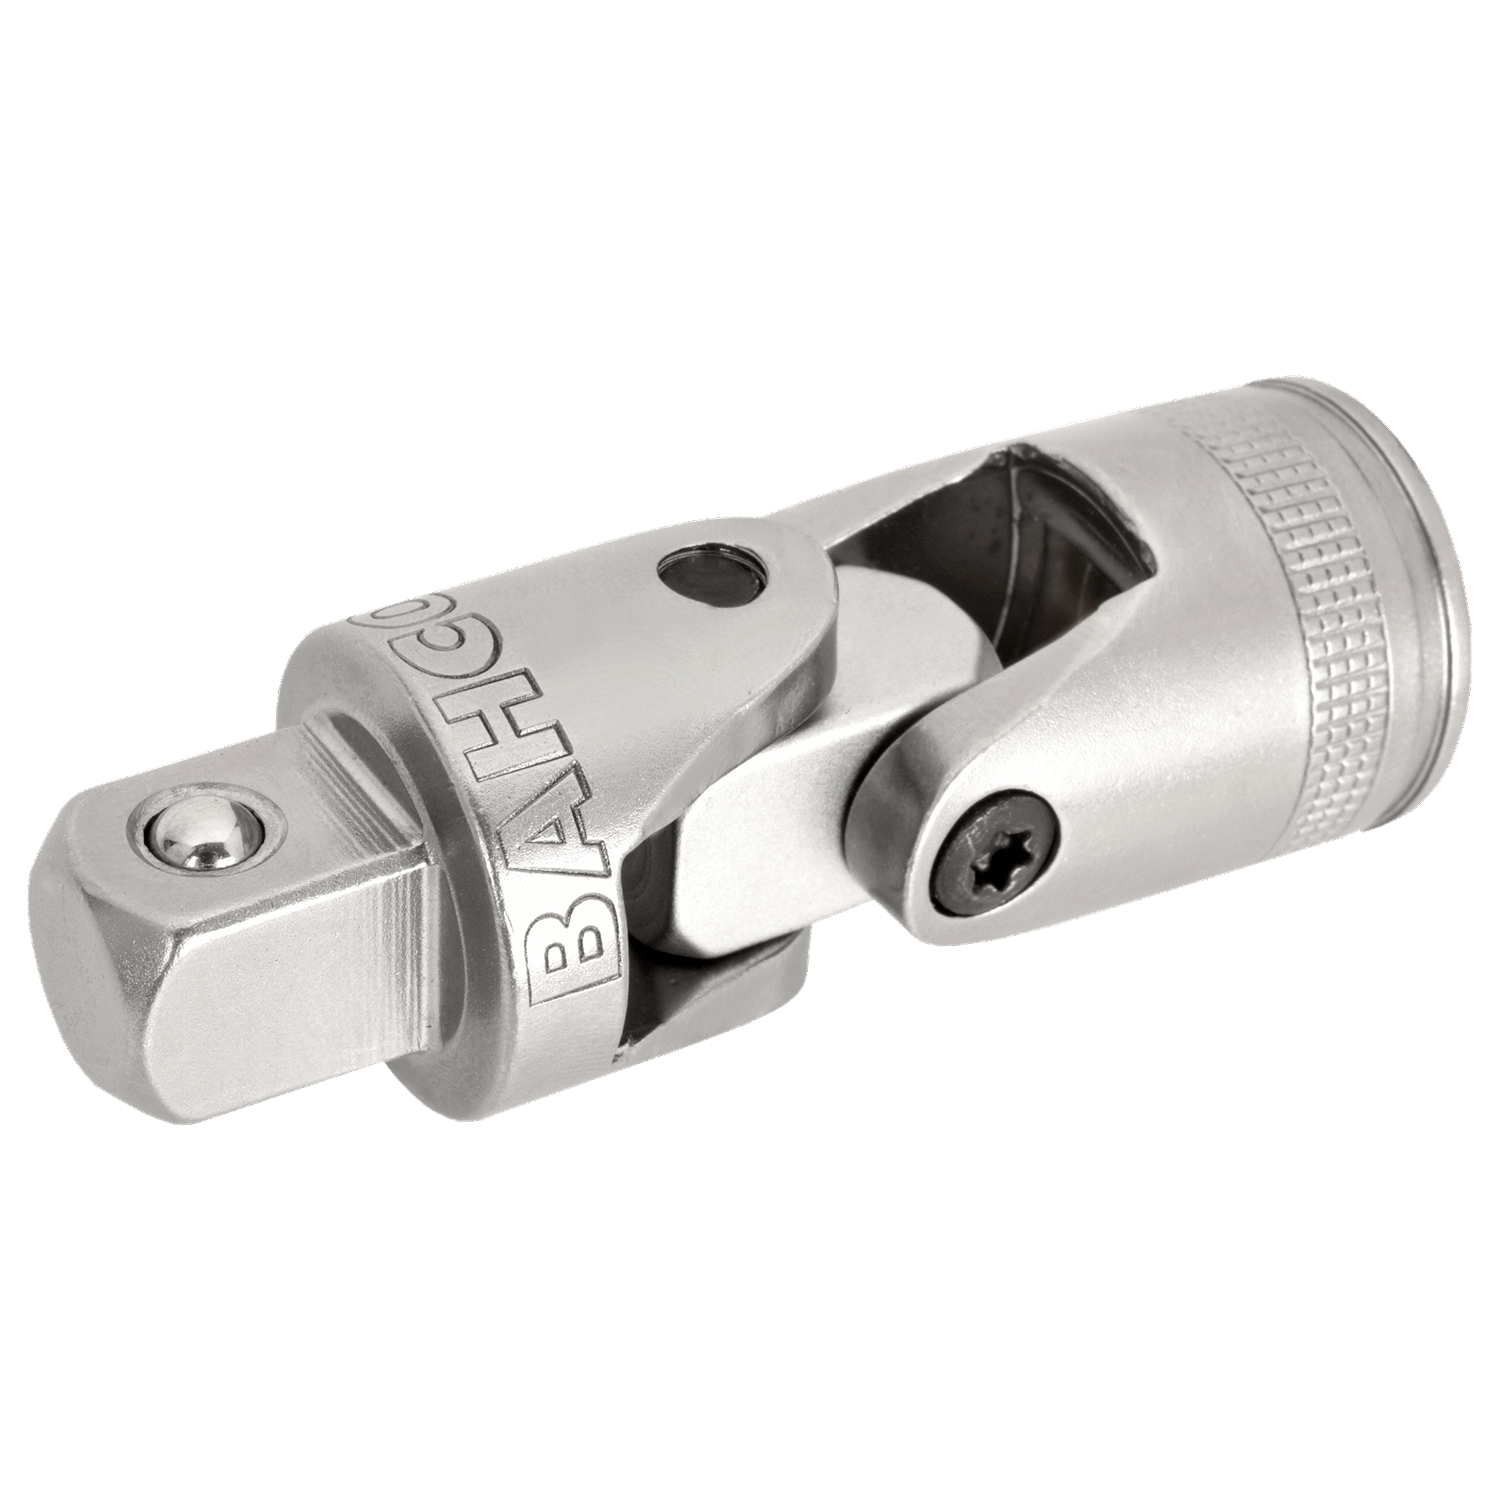 BAHCO 1/2" Square Drive Universal Joint (BAHCO Tools) - Premium Universal Joint from BAHCO - Shop now at Yew Aik.